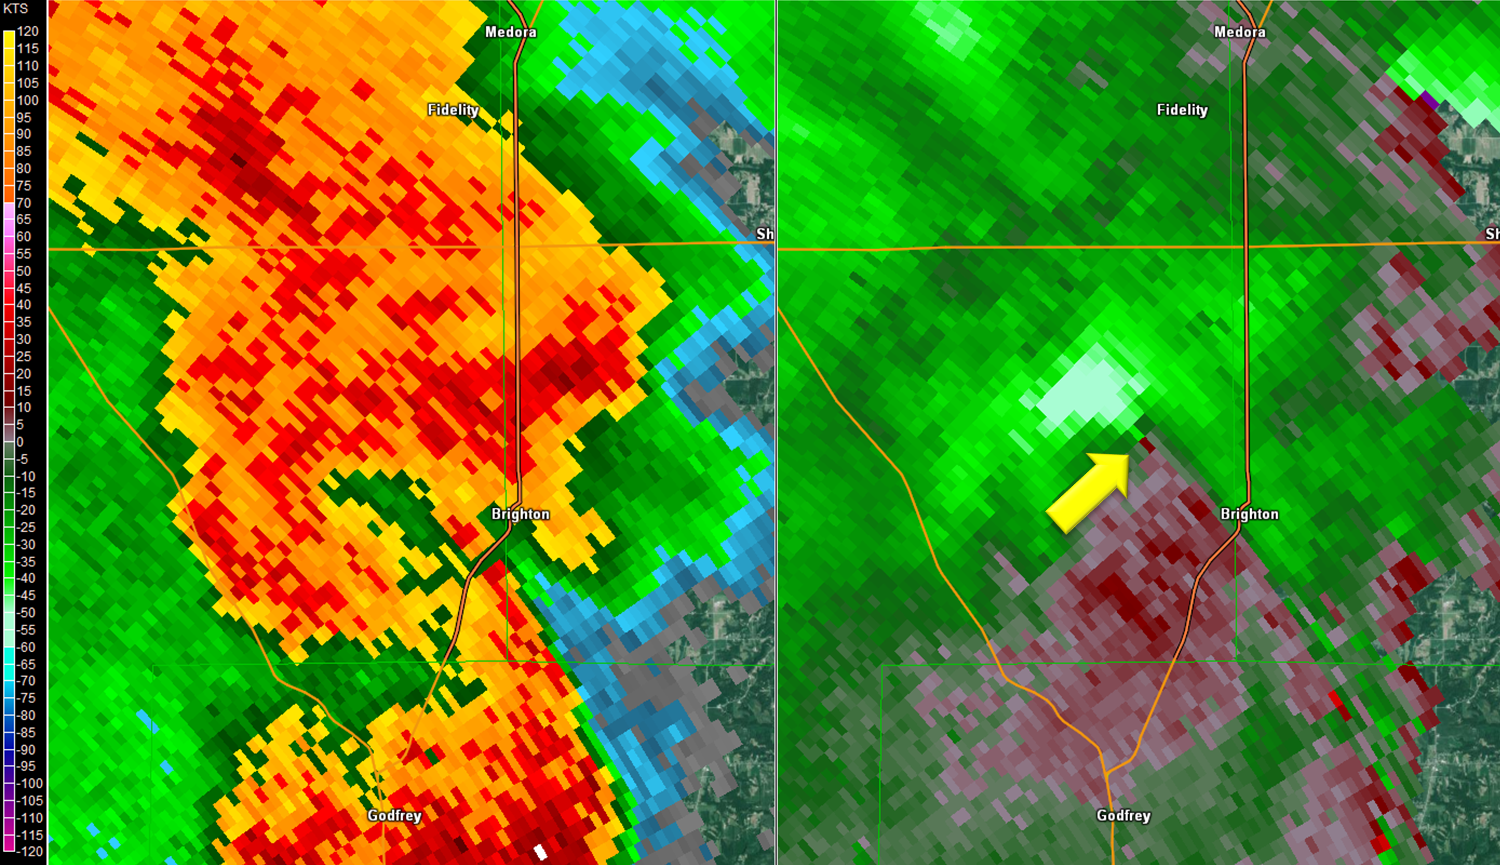 Two panel radar picture of reflectivity and storm relative velocity of the Brighton, IL tornado on April 29th, 2017.